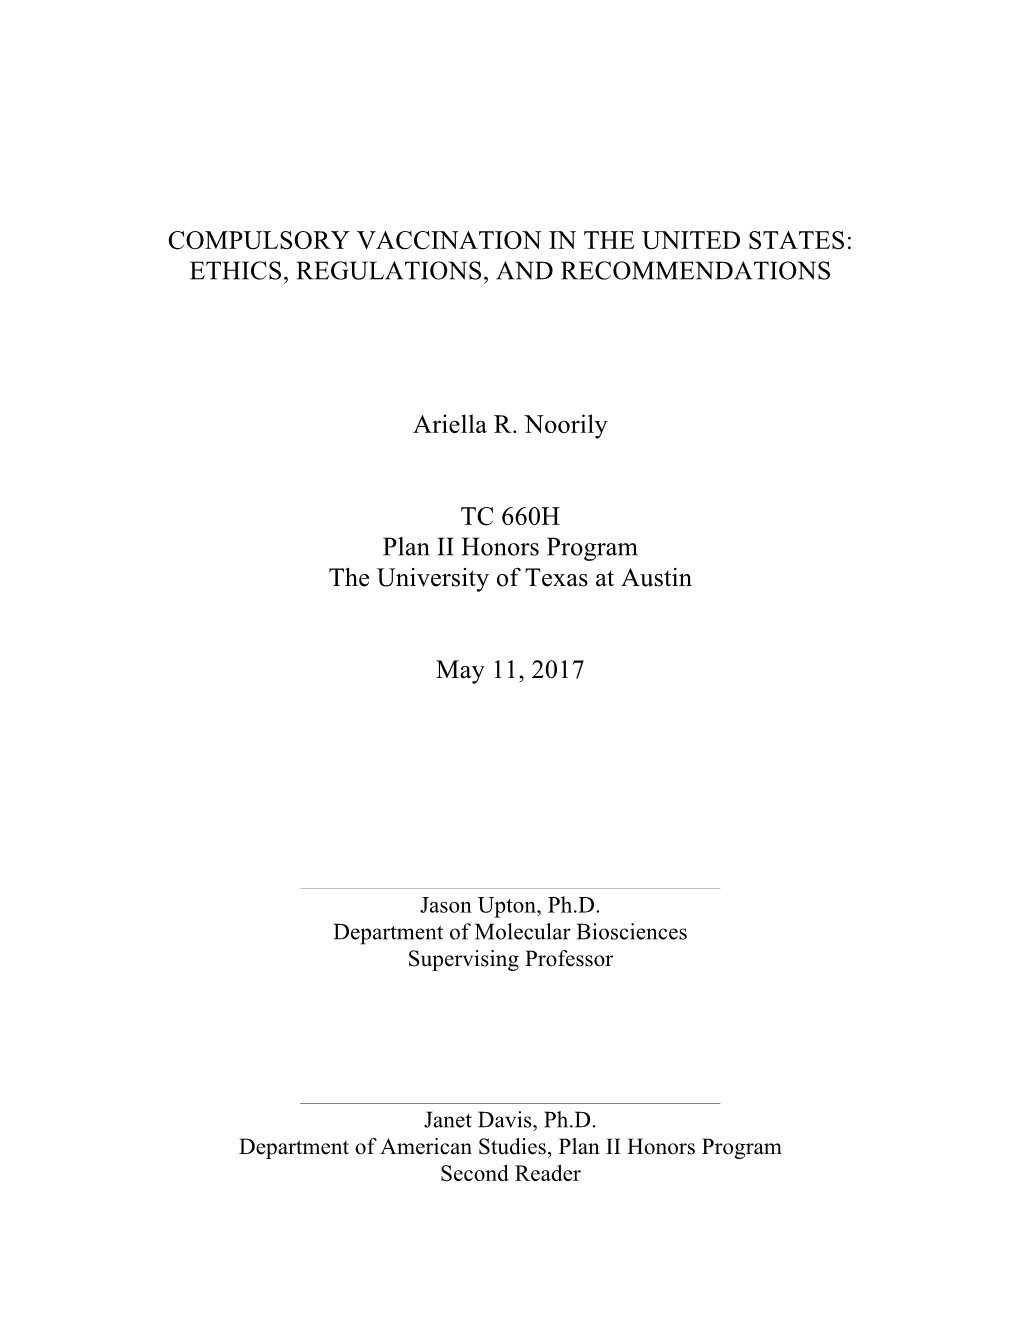 Compulsory Vaccination in the United States: Ethics, Regulations, and Recommendations